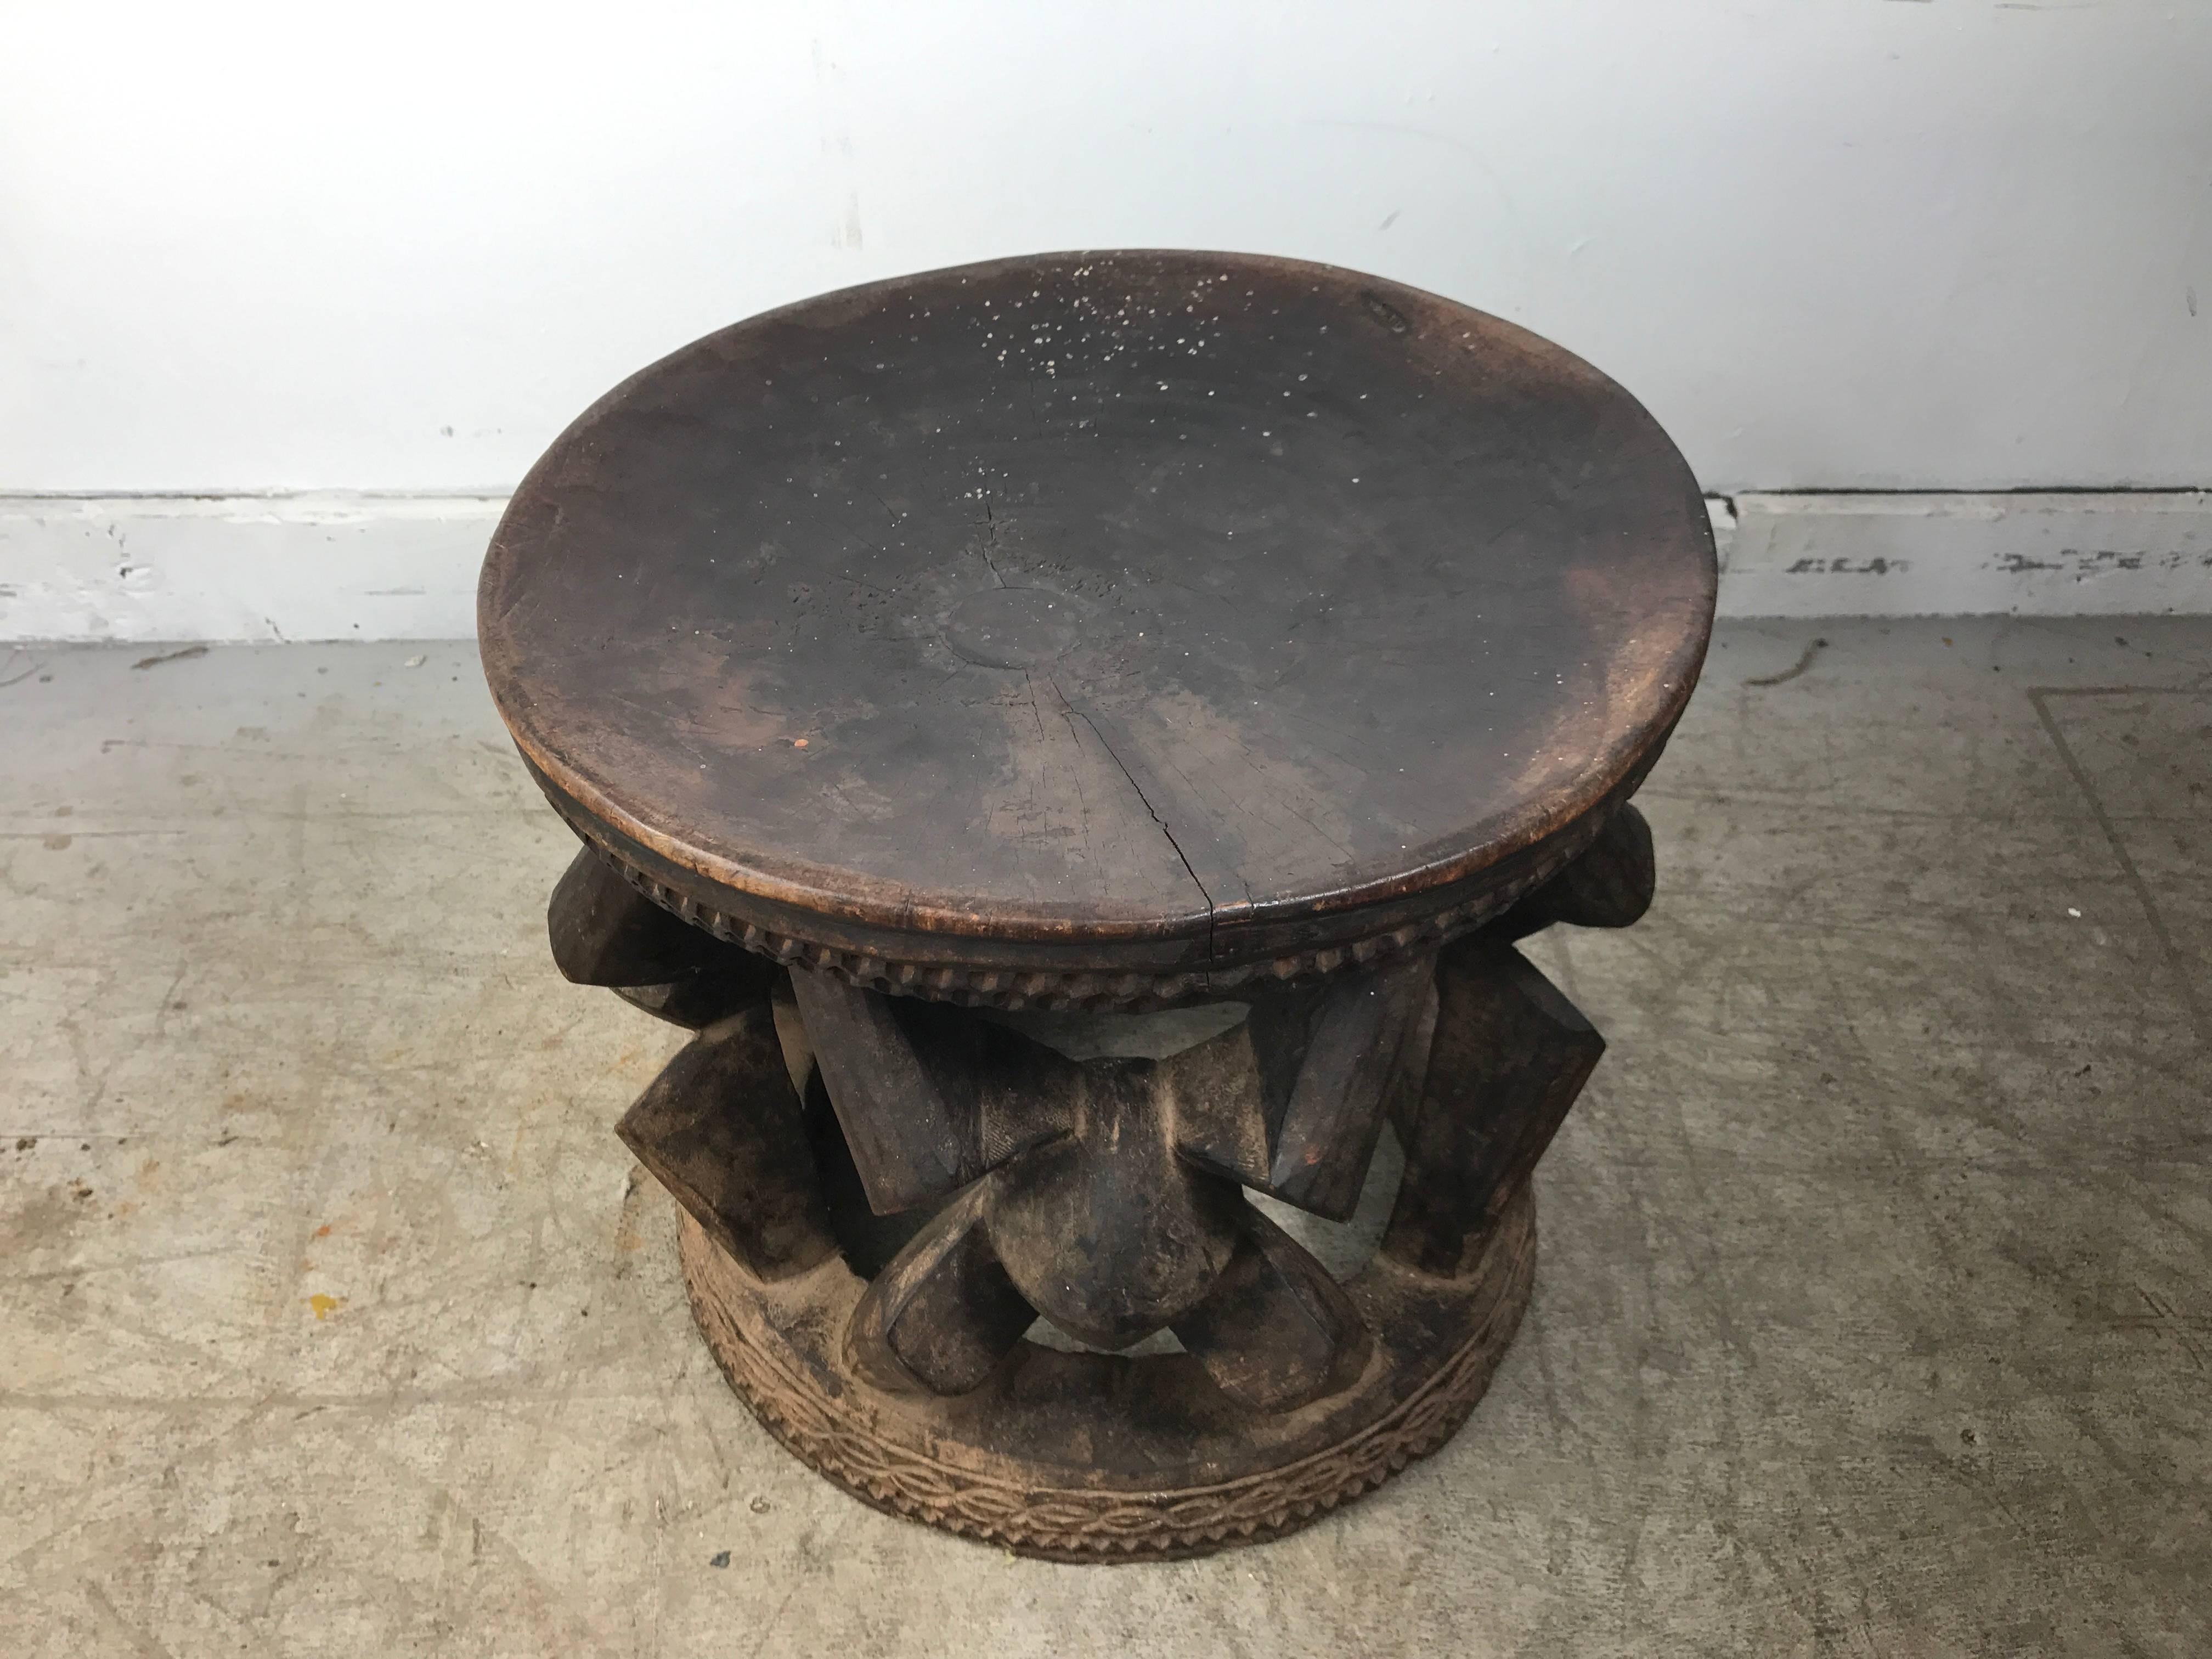 African carved wood stool from Ghana, circa 1920s-1930s, very unusual form, twisted knot design on flat wood base, carving details to top and bottom.